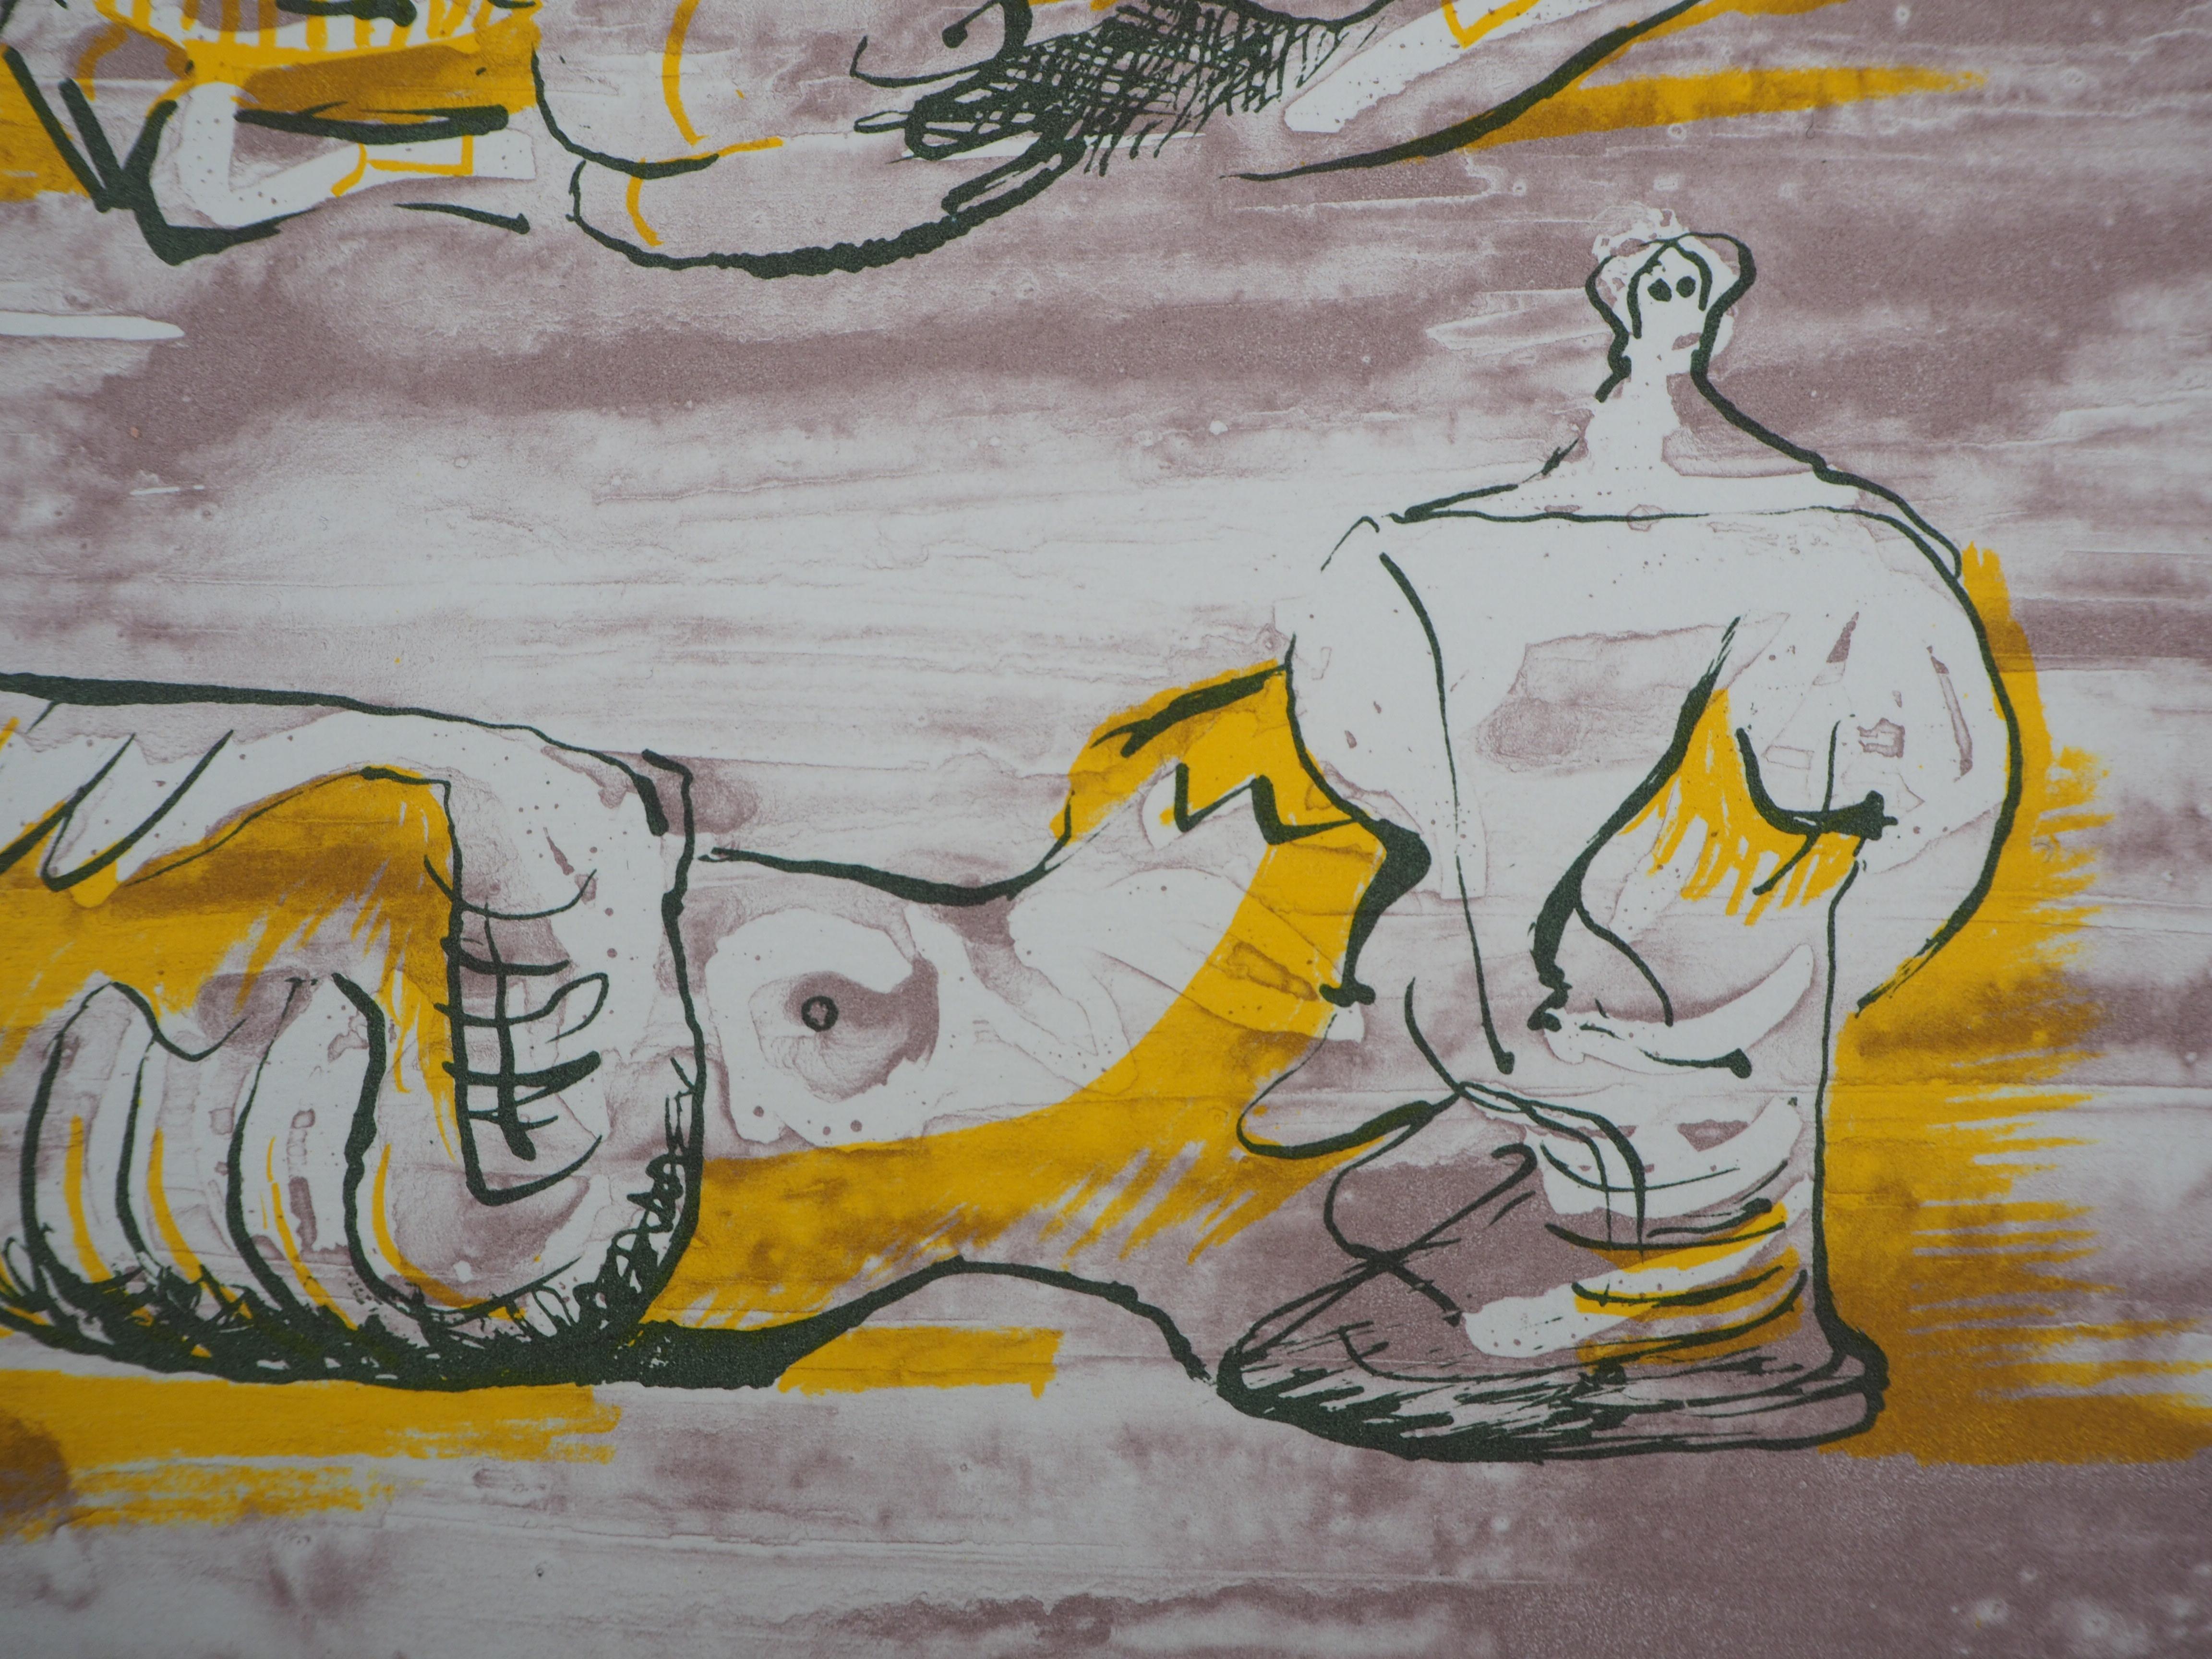 Three Reclining Nudes - Original lithograph - Modern Print by Henry Moore